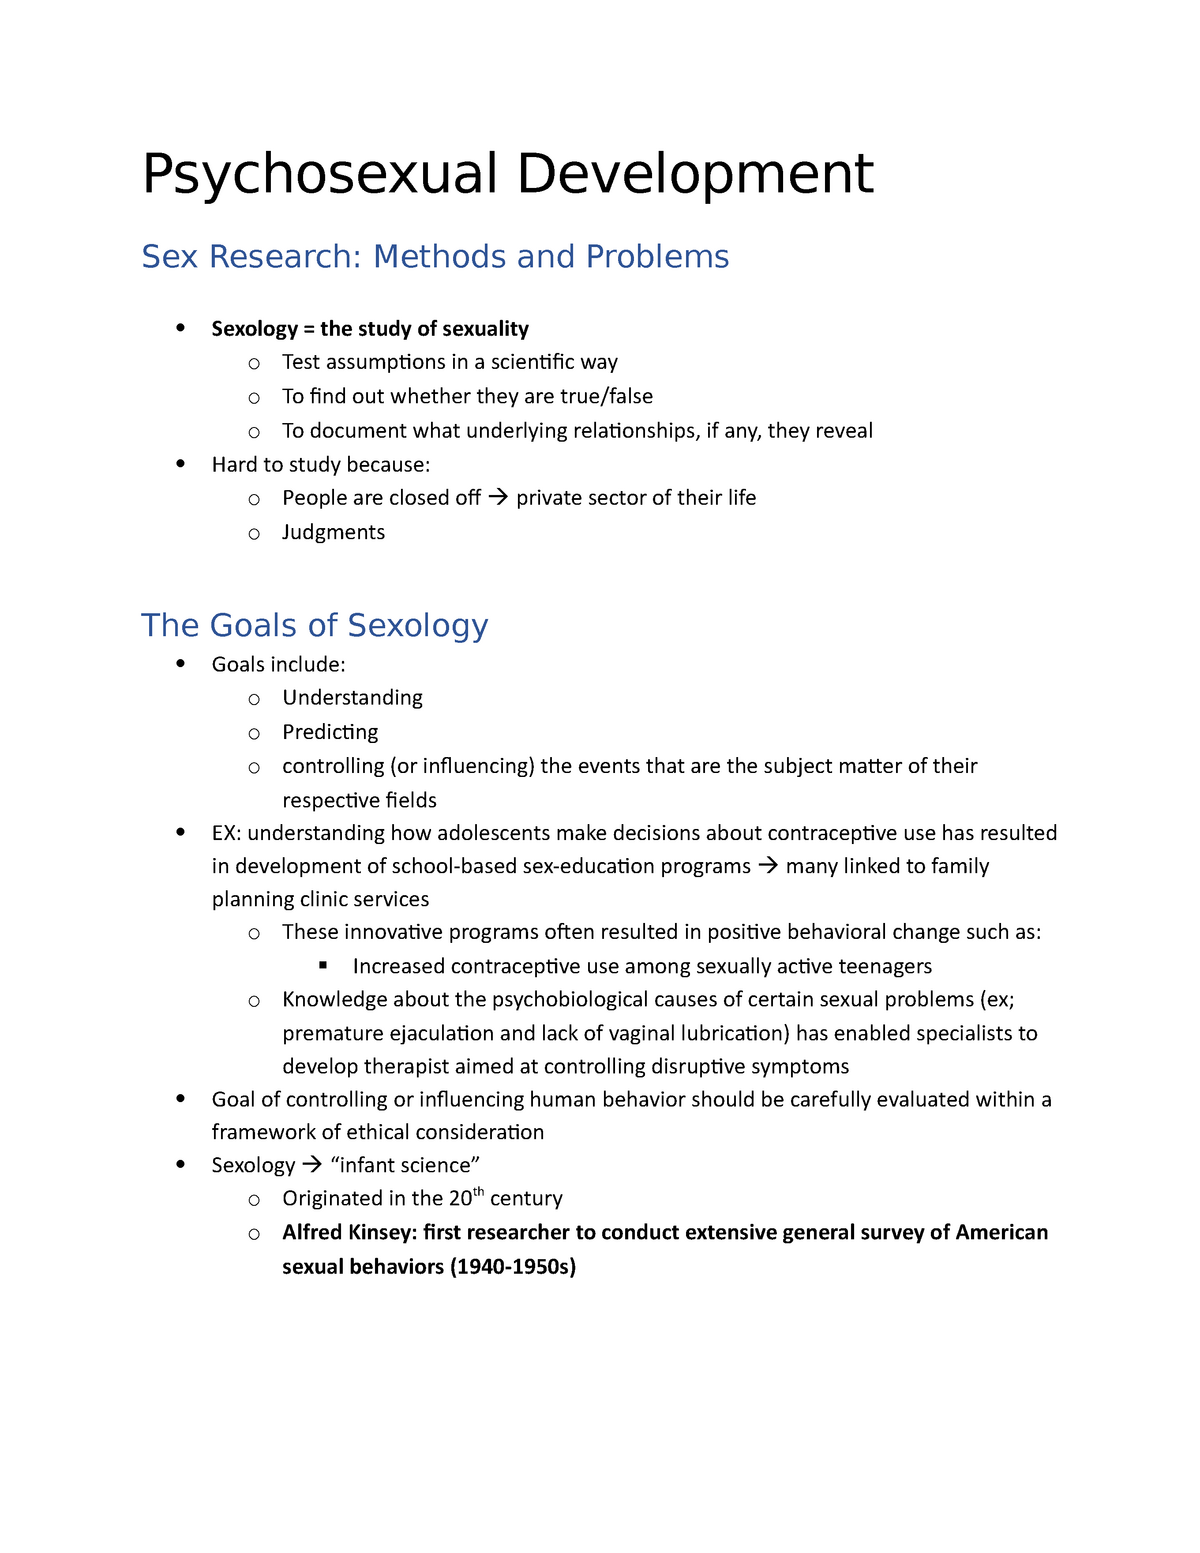 Chapter 2 Research Methods Psychosexual Development Sex Research Methods And Problems